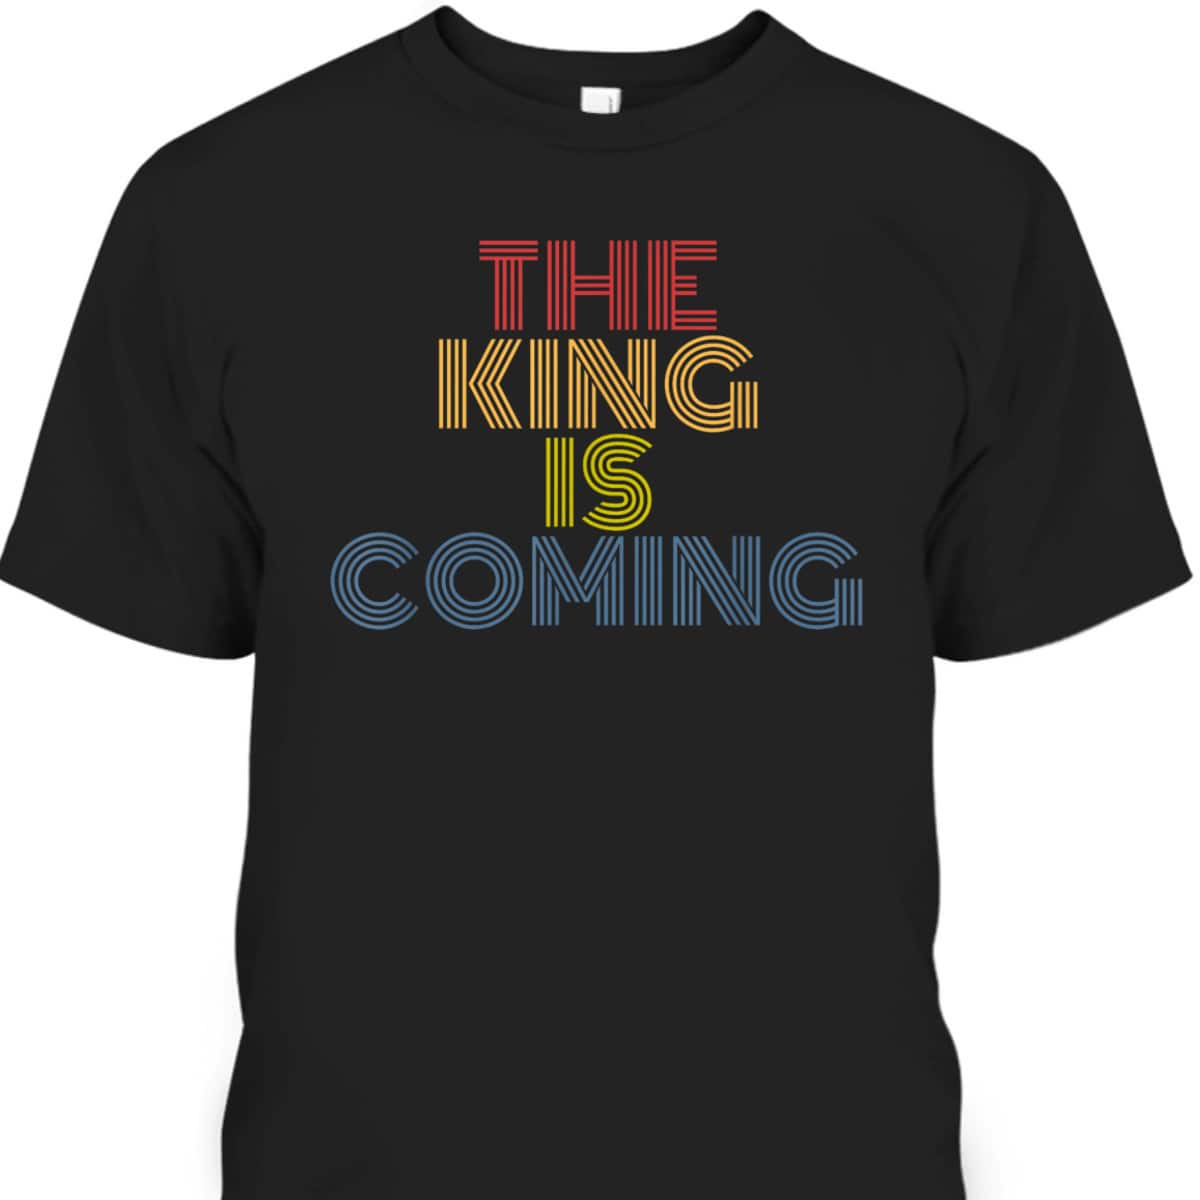 The King Is Coming Retro 70s Vintage Christian Religious T-Shirt